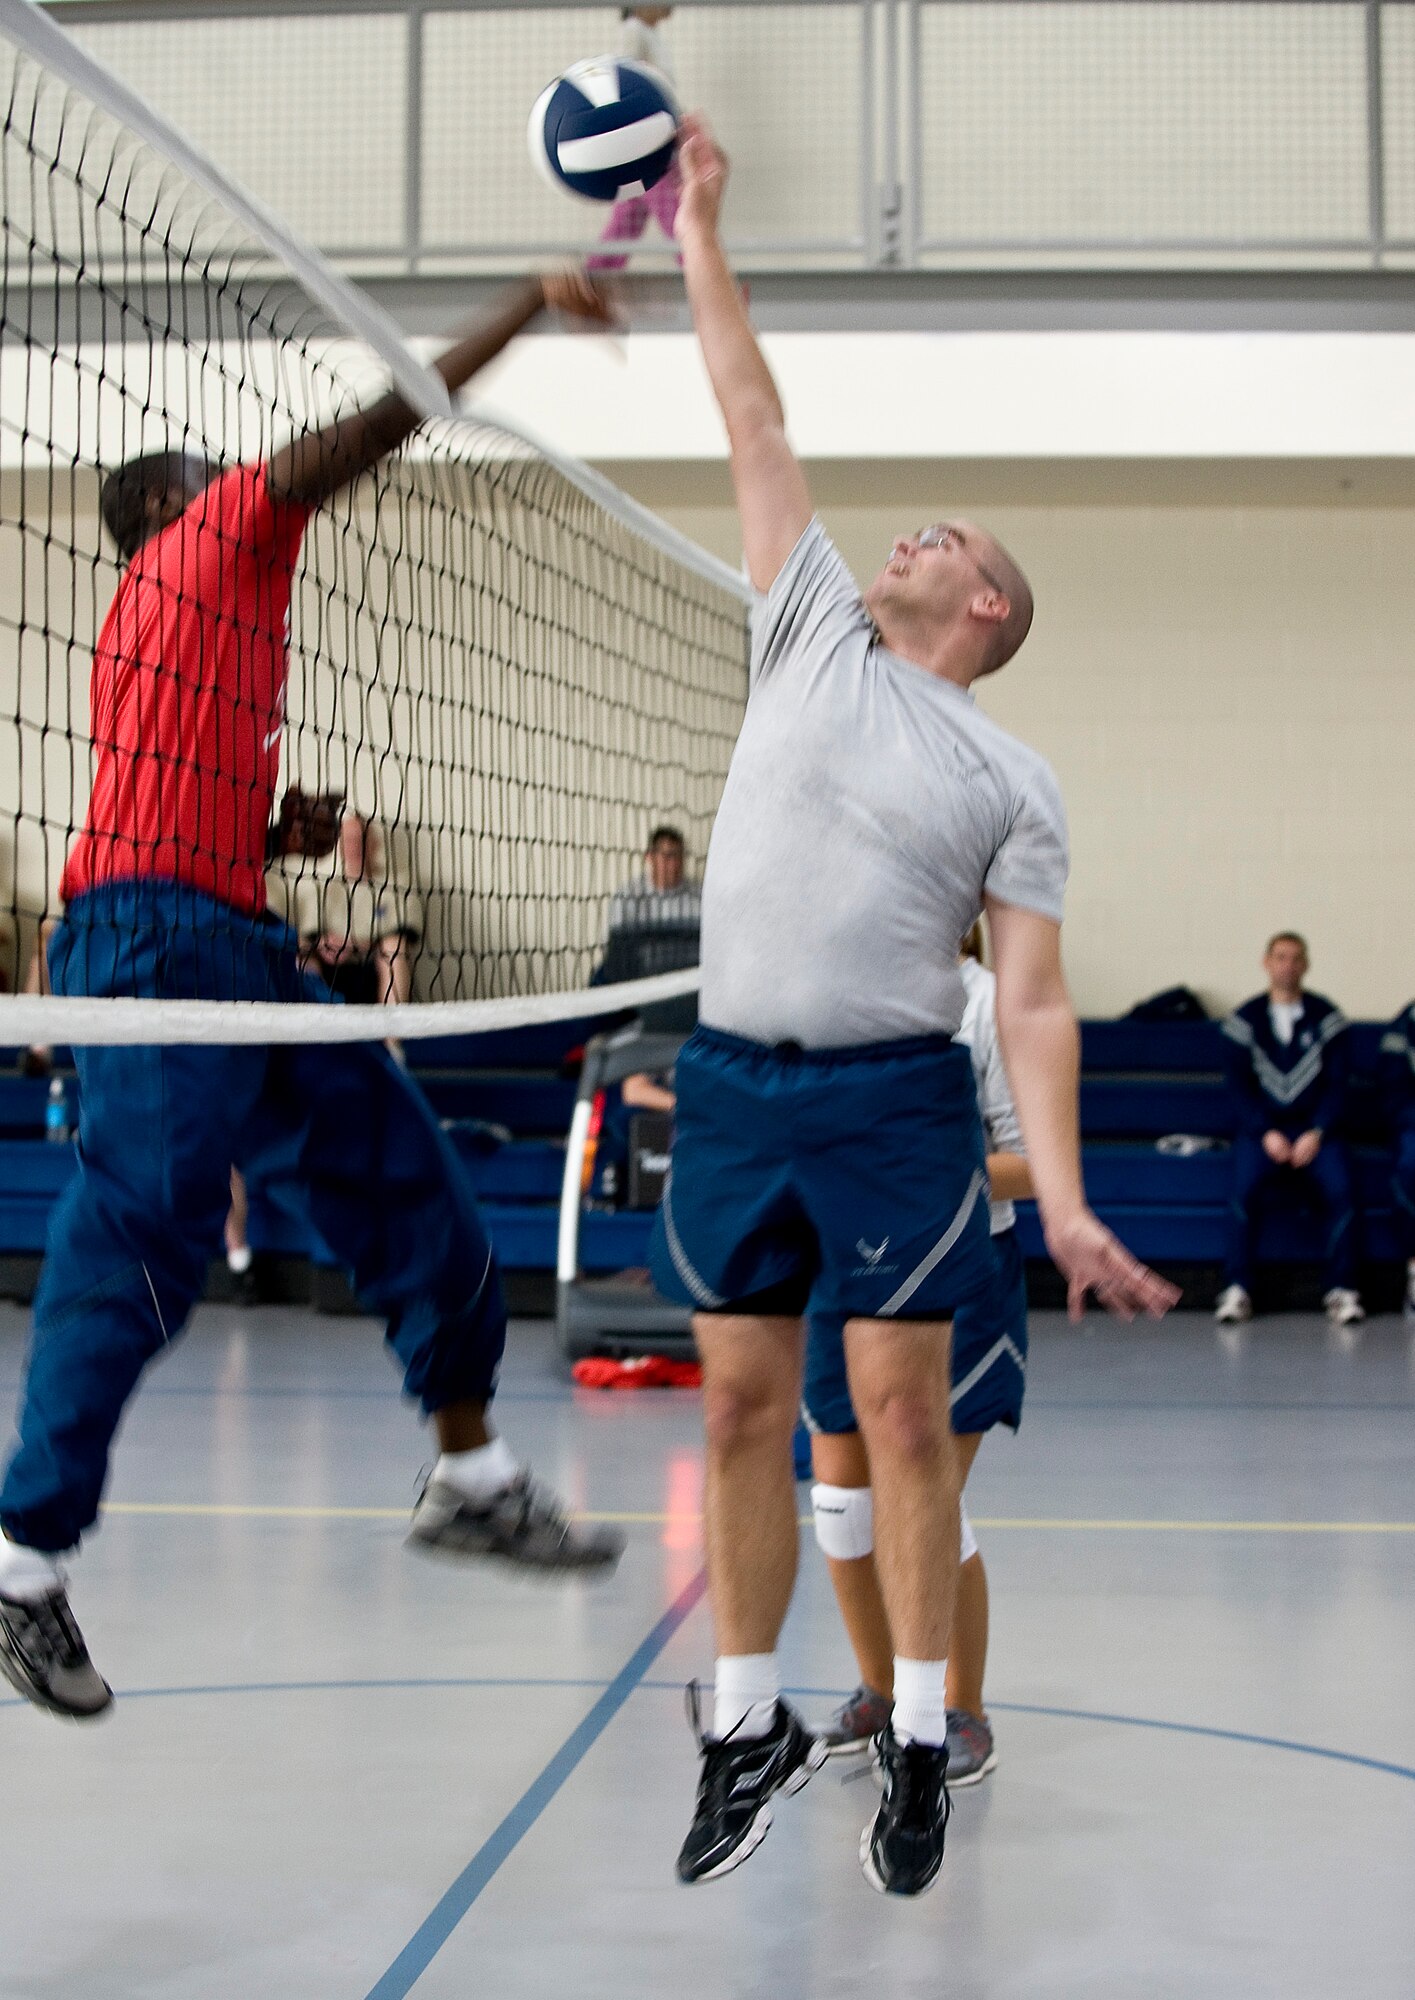 Airmen battle for a point during a volleyball match on Barkdale Air Force Base, La., Nov. 16. The match was part of the 2012 Sports Day, an annual event that gives Airmen the opportunity to participate in several individual and team sports throughout the day focusing on teamwork and boosting morale. (U.S. Air Force photo/Staff Sgt. Chad Warren)(RELEASED)